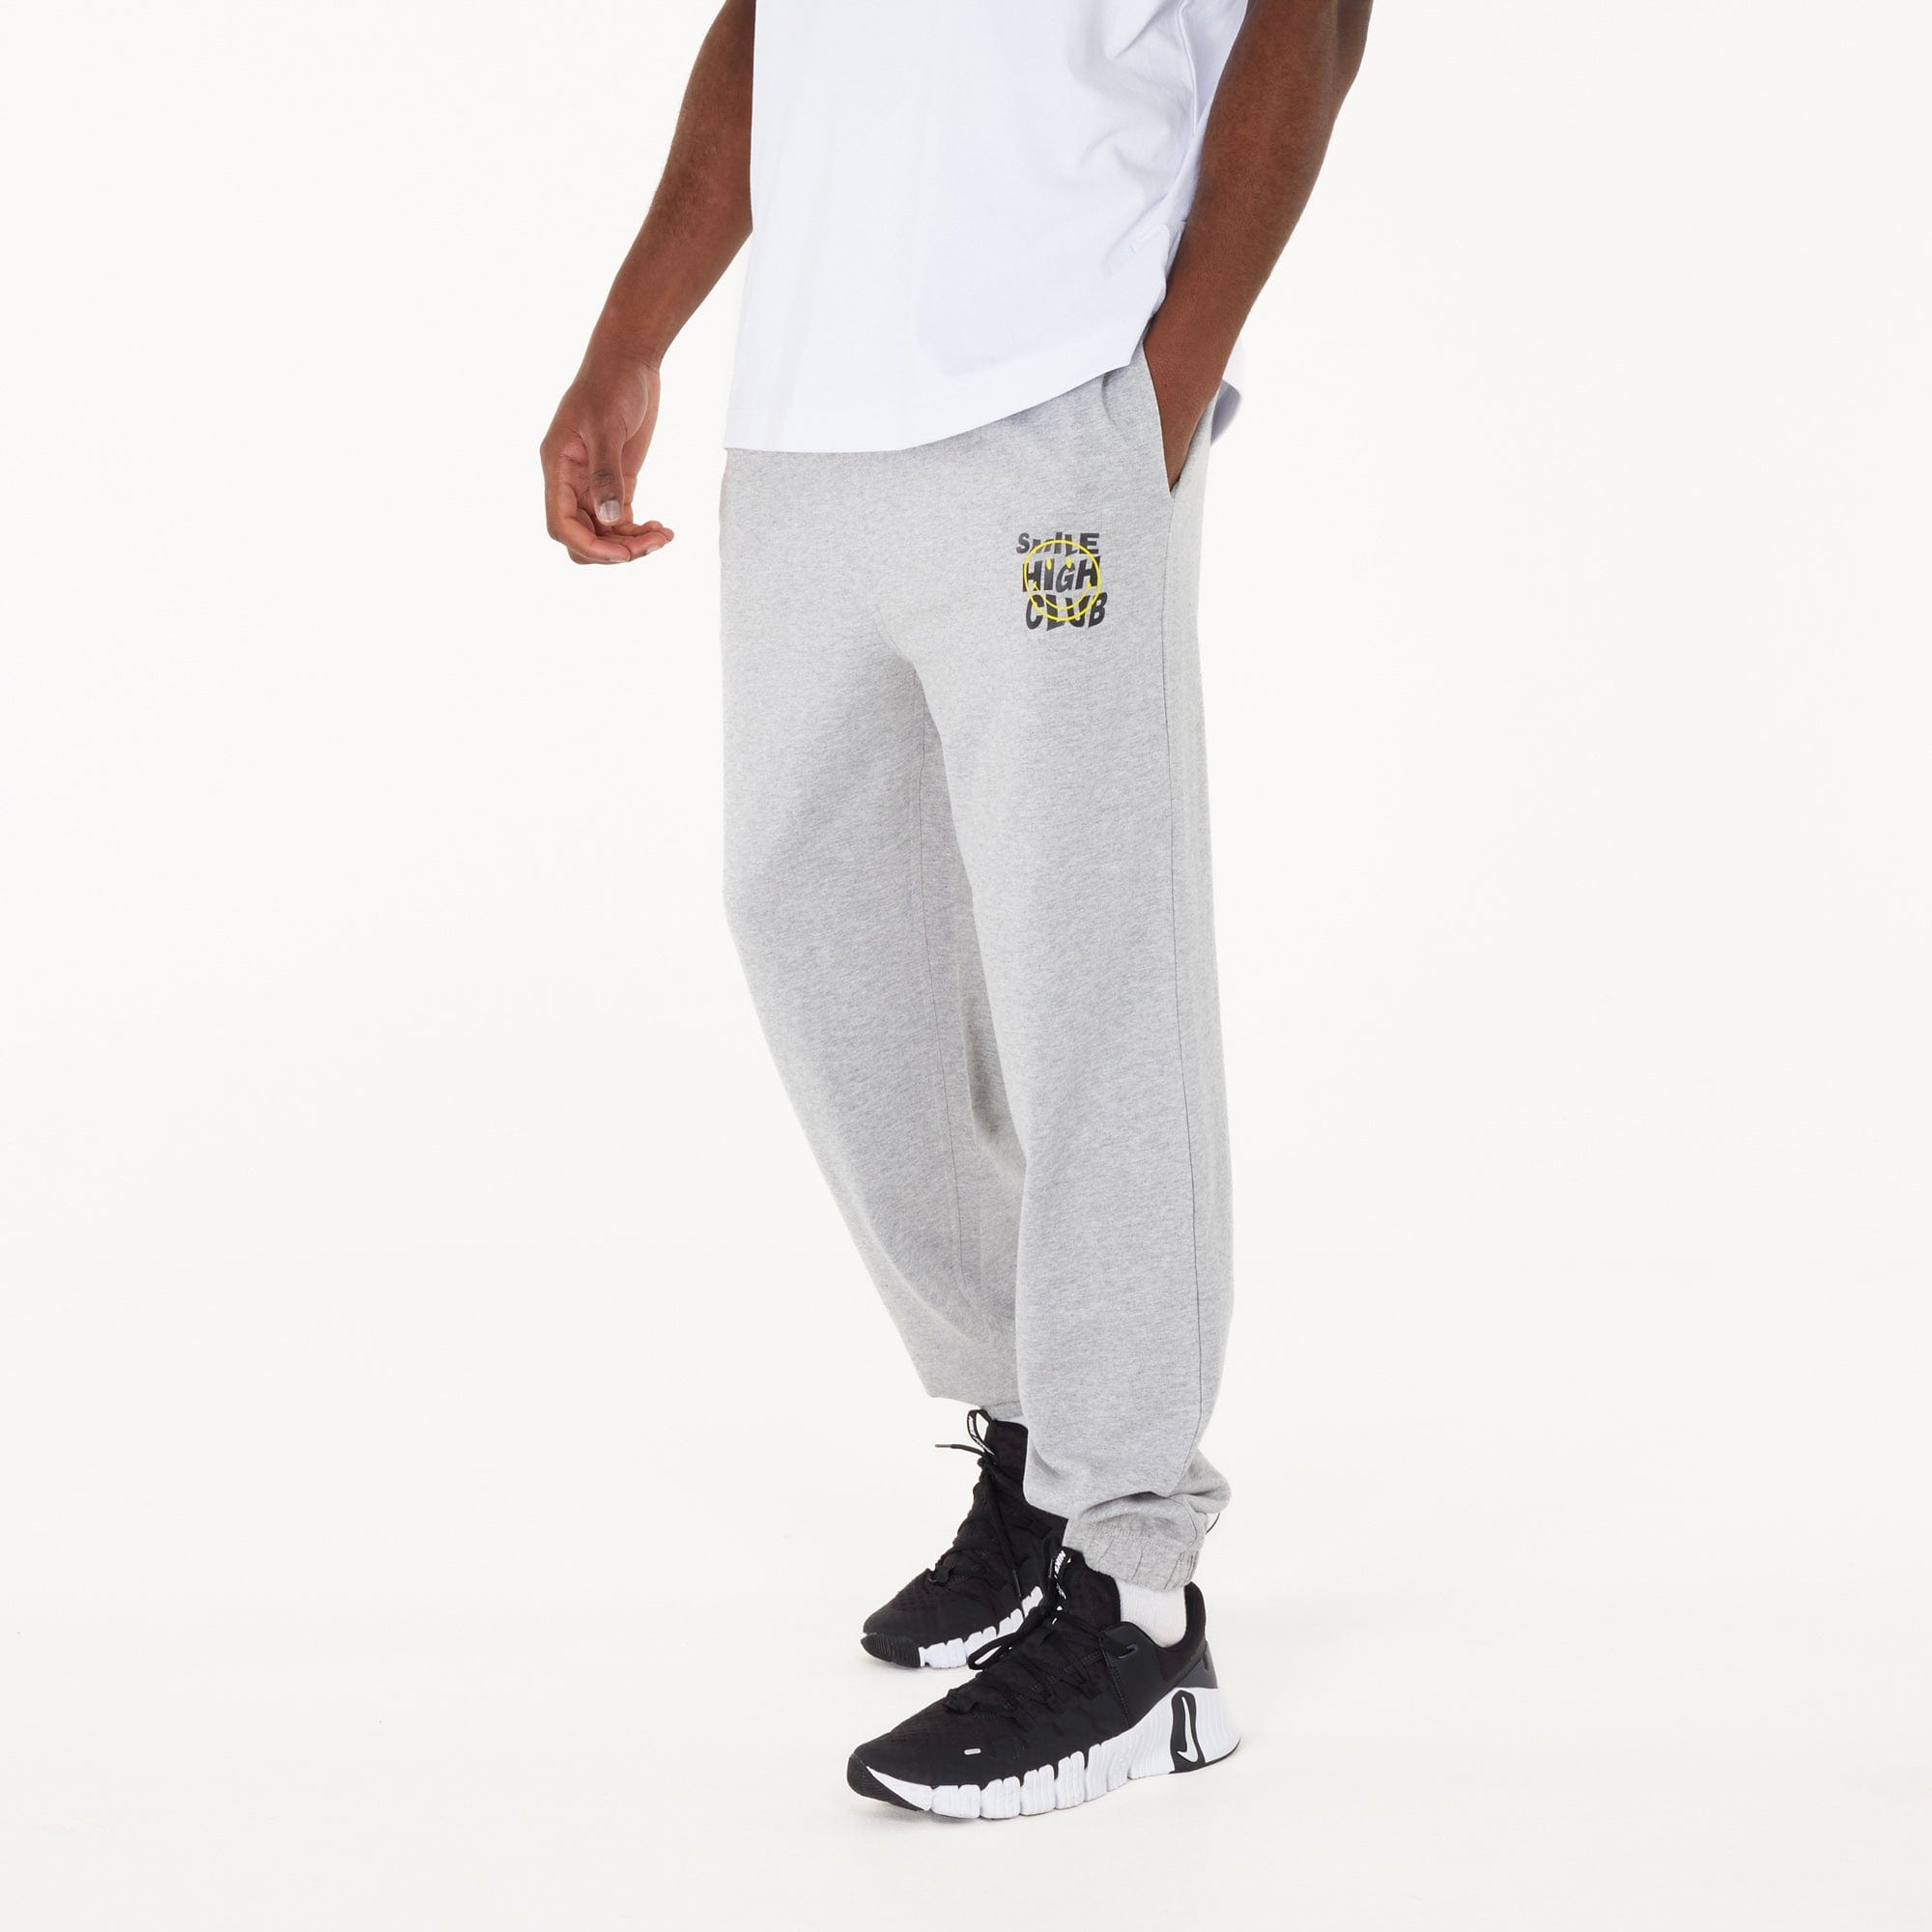 WIT Fitness Joggers WIT & Smiley Originals Smile High Club Joggers in Grey